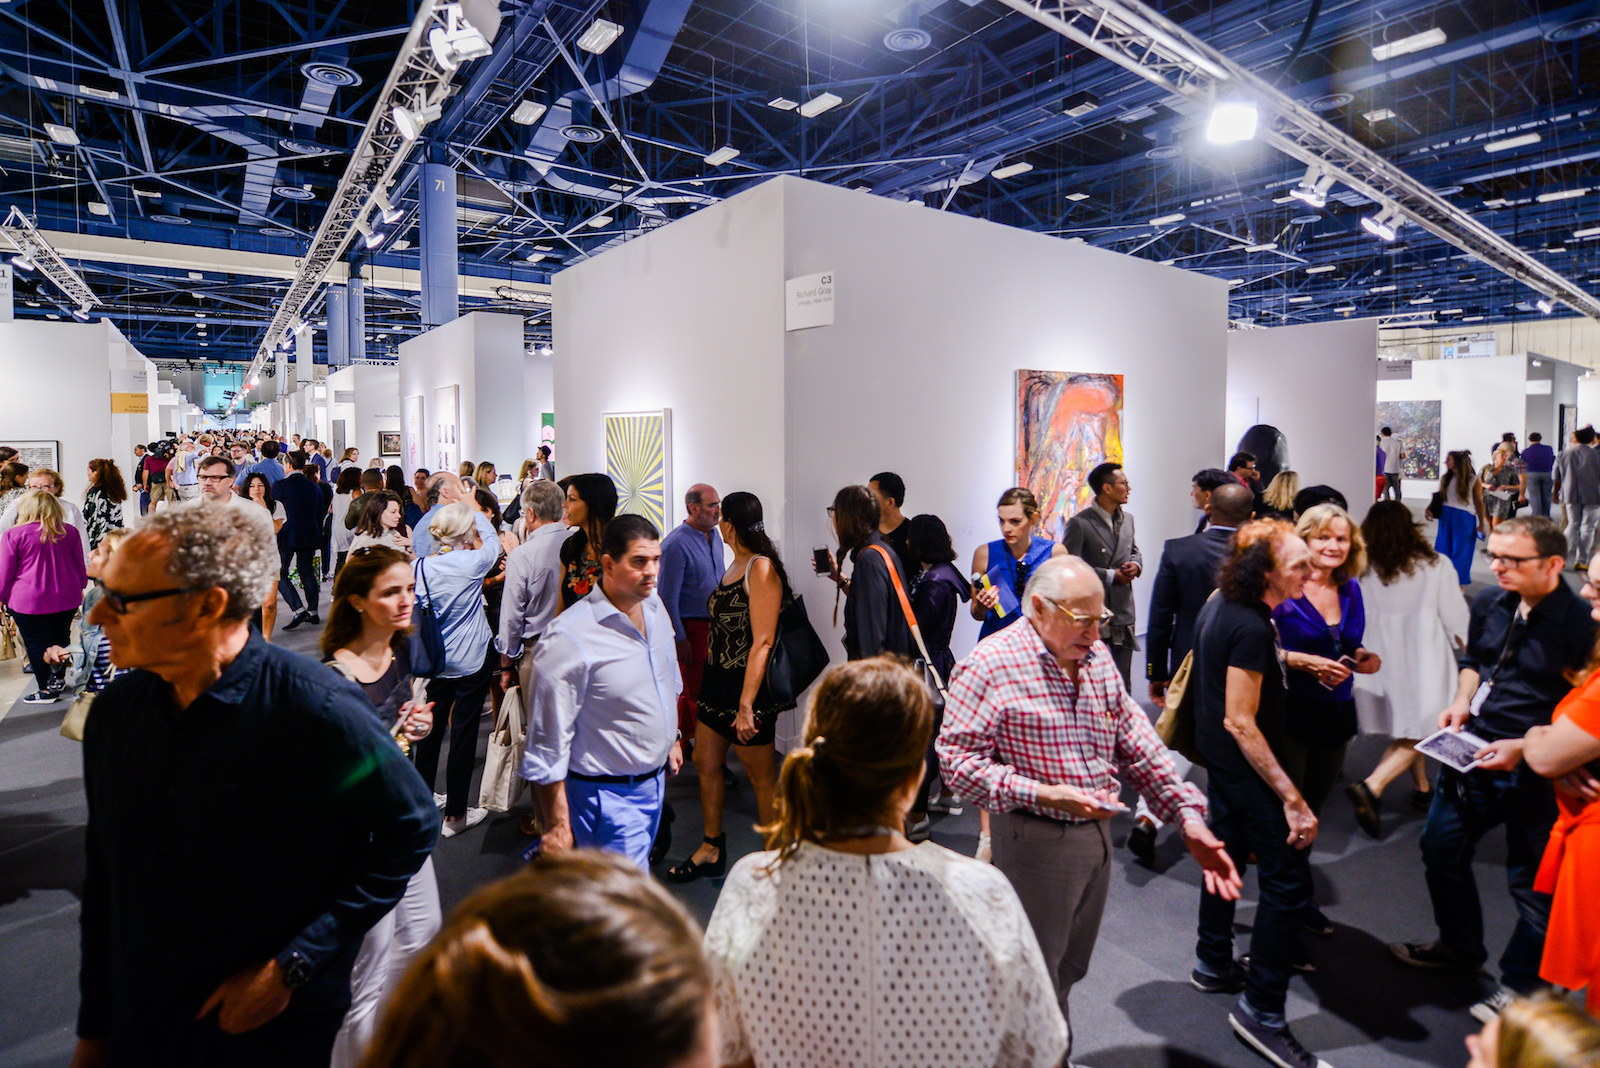 Kenny Schachter on how to survive an art fair